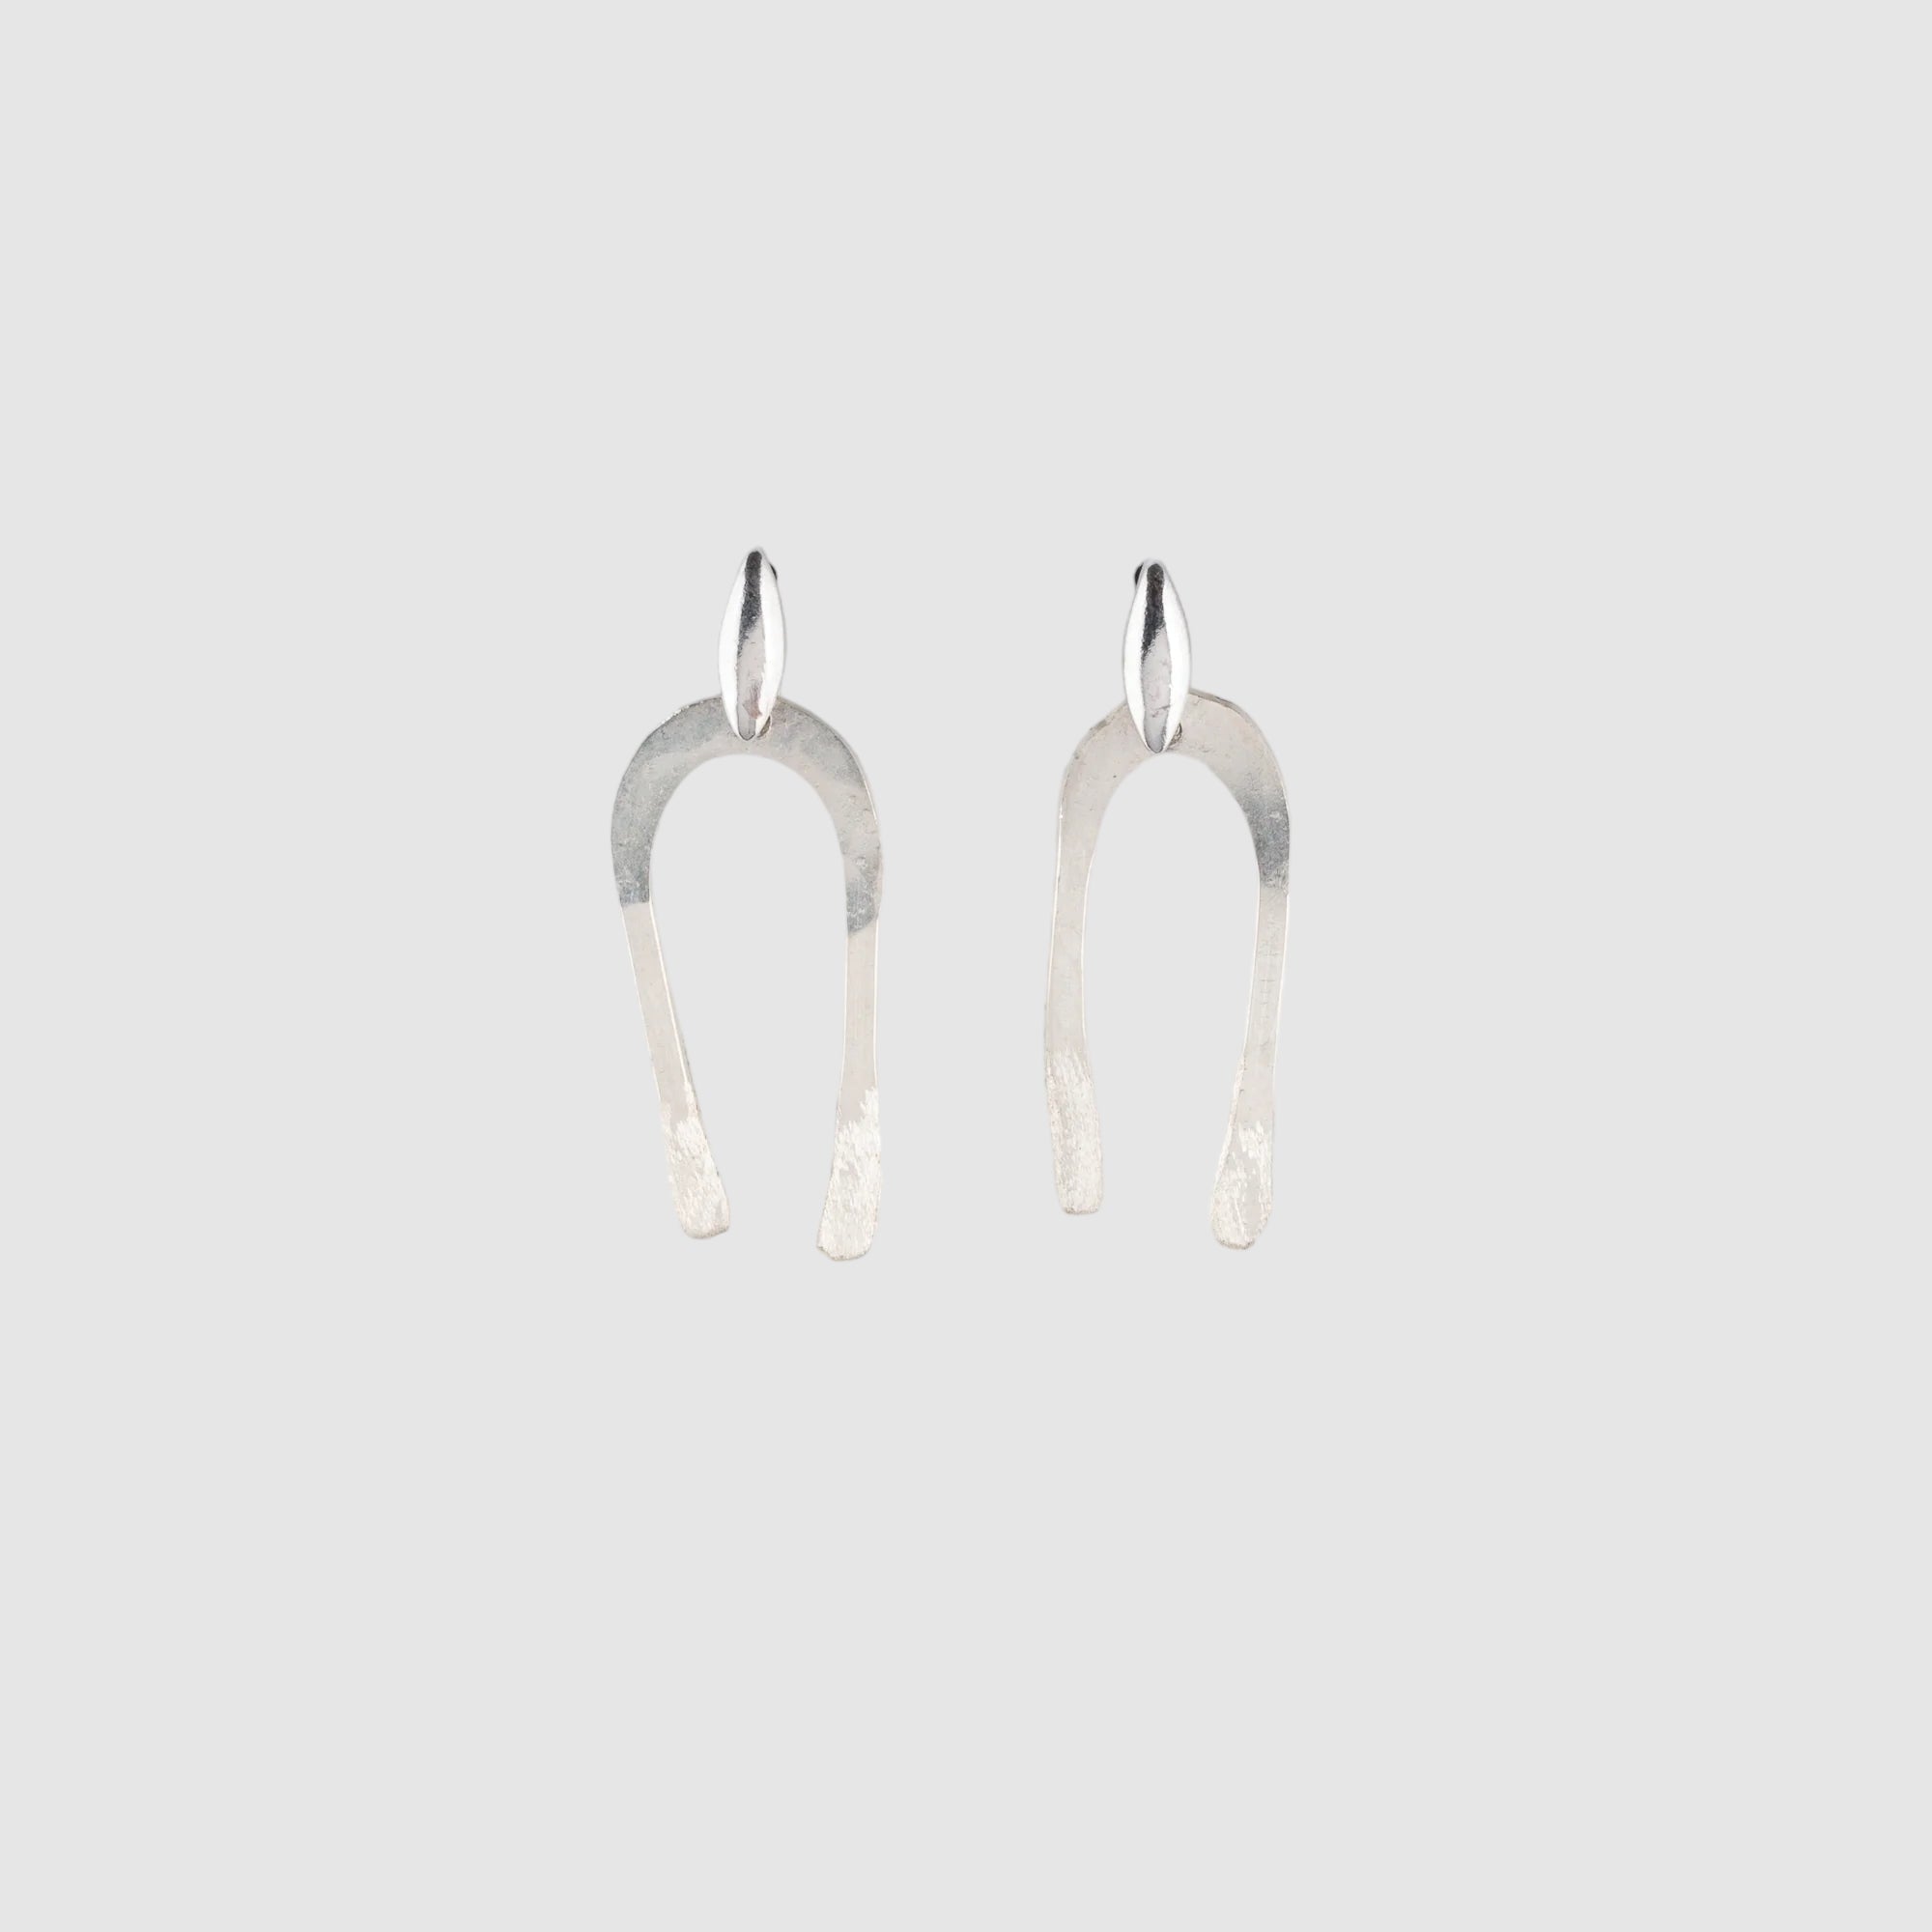 ARCO STERLING SILVER POST EARRINGS // SMALL